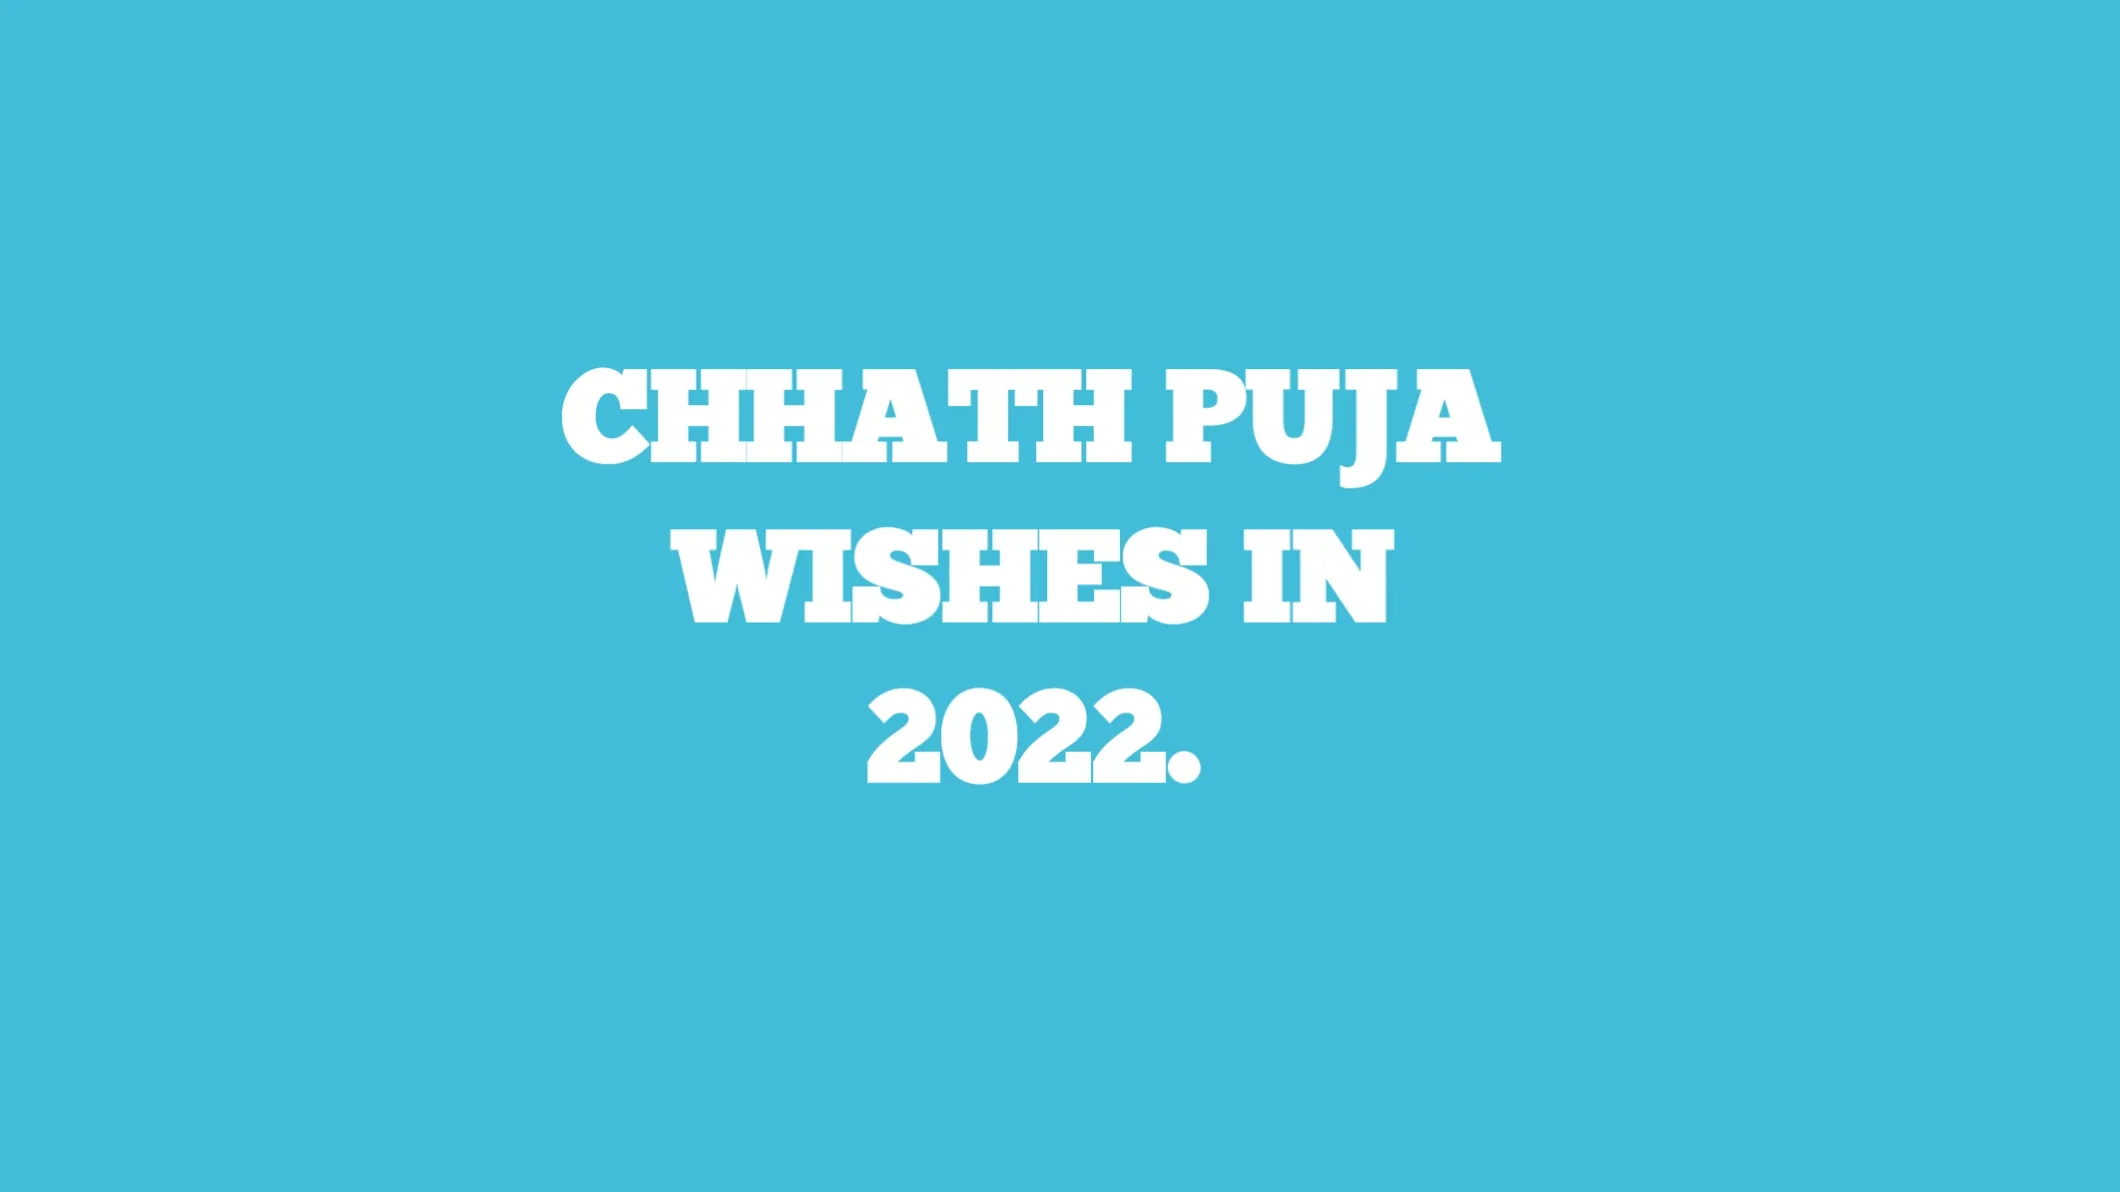 Chhath puja wishes in english